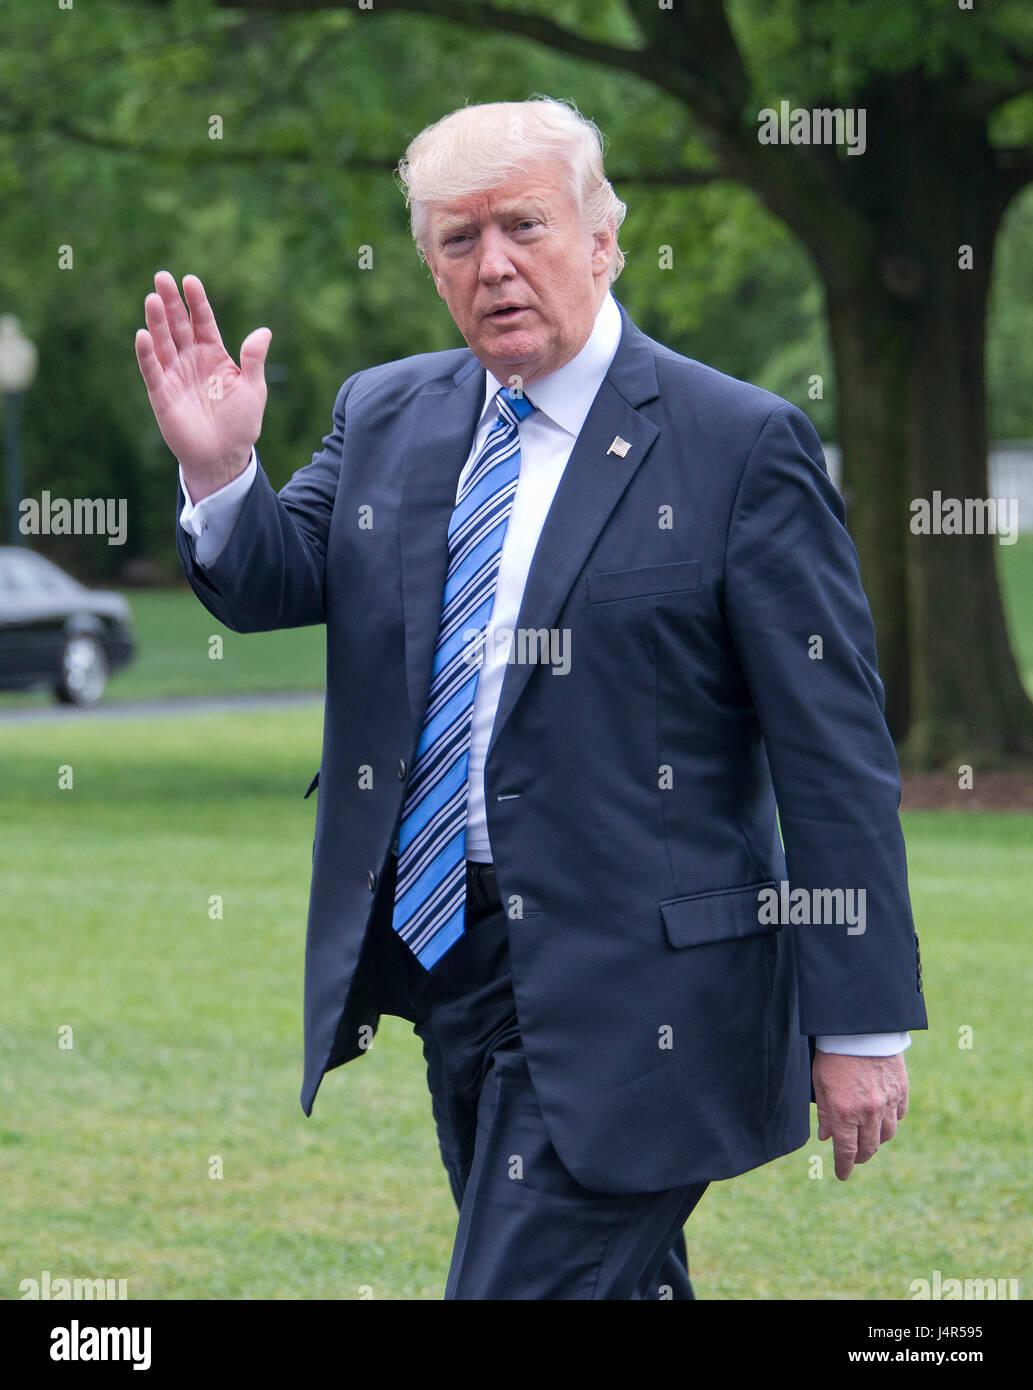 Washington DC, USA. 13th May, 2017. United States President Donald J. Trump waves to the press as he walks on the South Lawn of the White House in Washington, DC after traveling to Lynchburg, Virginia to make remarks at the Liberty University Commencement ceremony on Saturday, May 13, 2017. Credit: Ron Sachs/Pool via CNP /MediaPunch Credit: MediaPunch Inc/Alamy Live News Stock Photo